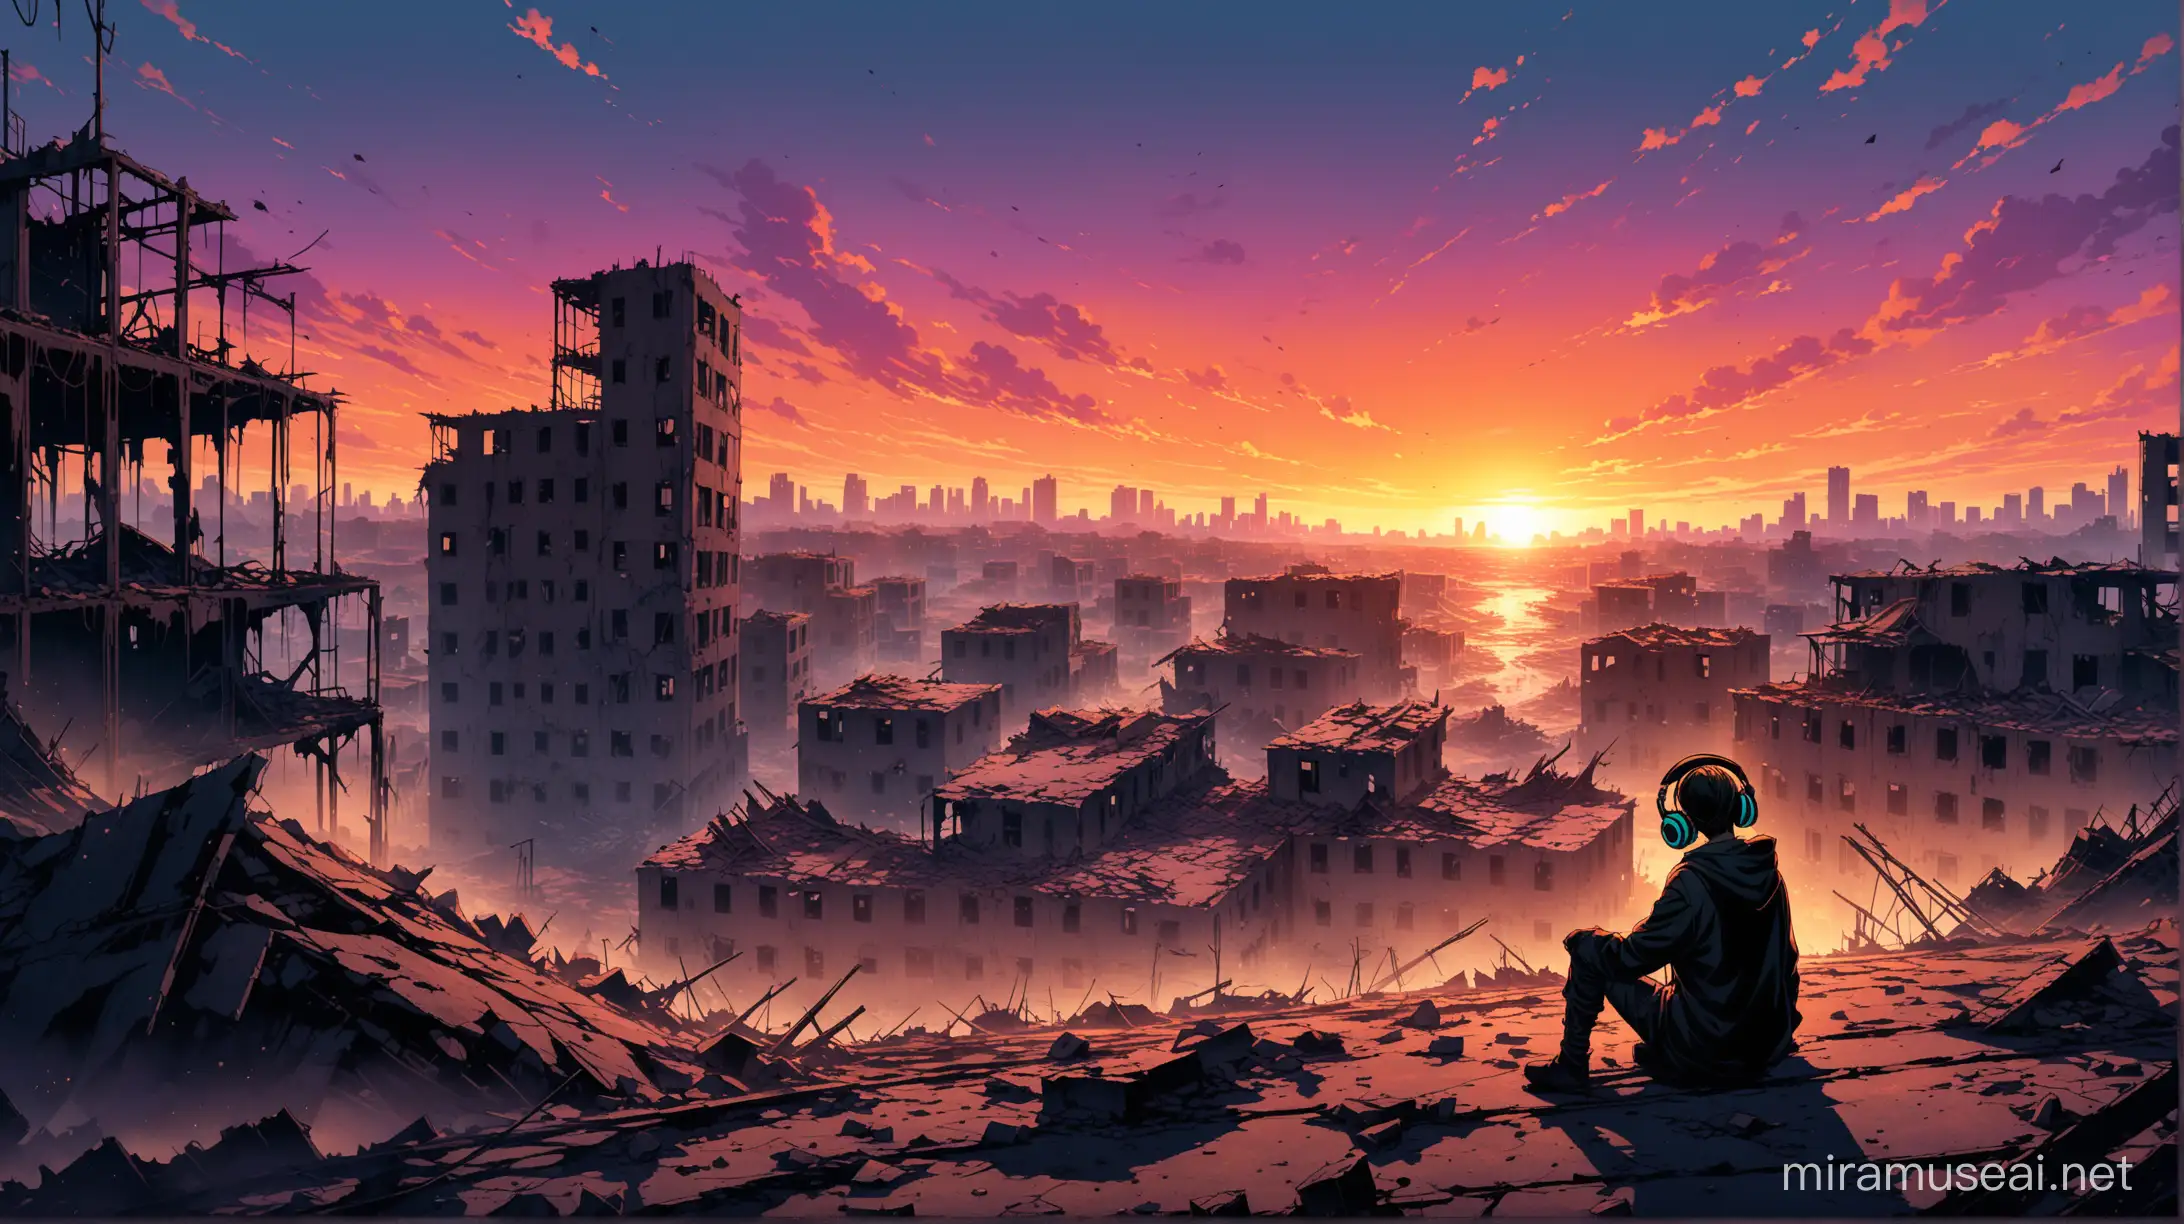 A young, slender character wearing a black hooded cloak sits on the edge of a dirty, partially destroyed building, immersed in the music echoing from his headphones. In the background, a large ruined city stretches out, with various rubble and destroyed buildings, where nature slowly begins to infiltrate the abandoned structures. In the background, a sunset painting the sky in vivid tones, seen from a 45-degree camera perspective, capturing the entire scene of post-apocalyptic desolation with vibrant colors and high contrast.